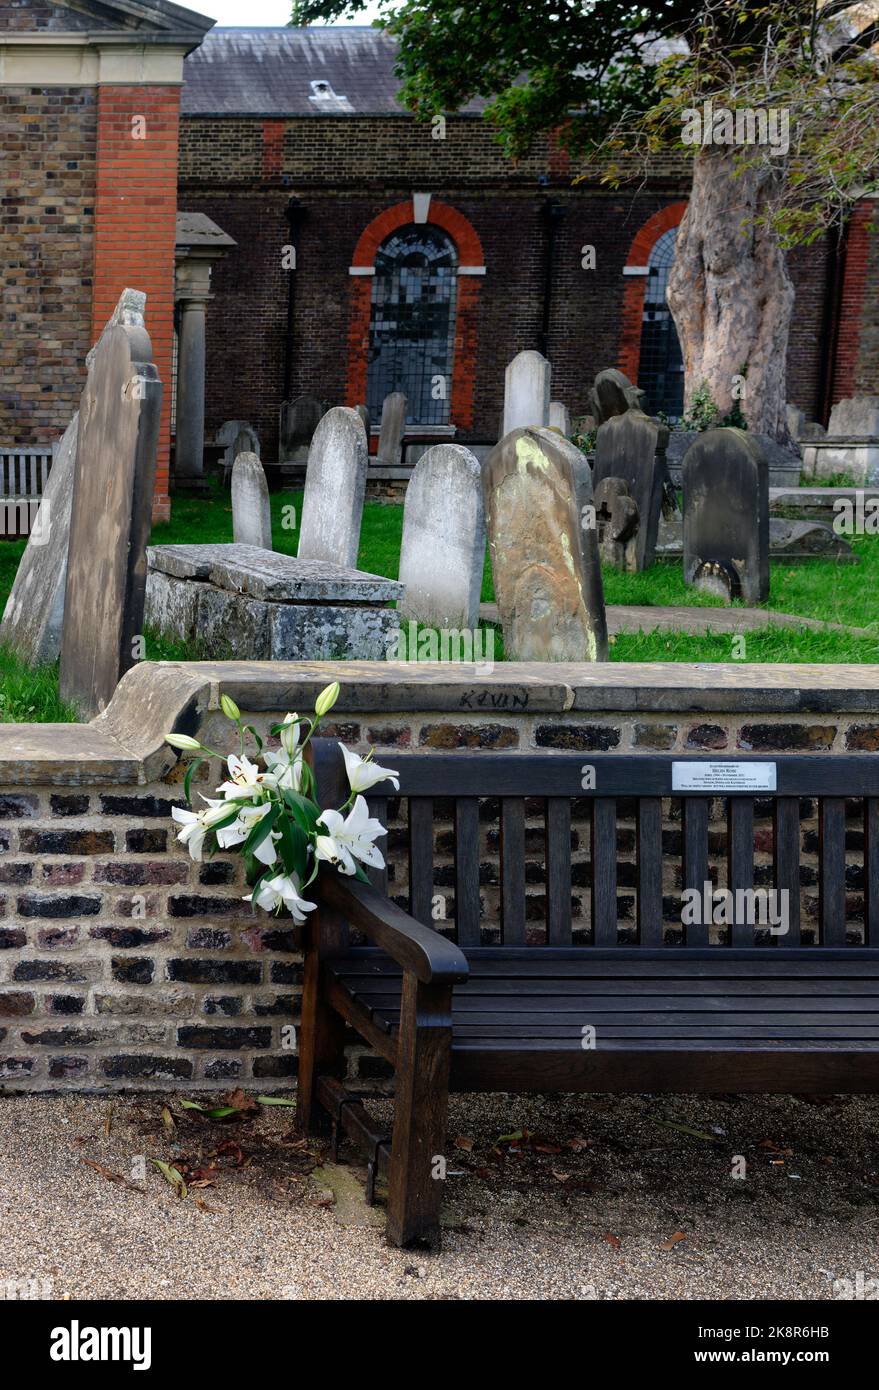 Flowers on a bench of remembrance whilst the gravestones behind have none, Kew Green, London, England Stock Photo